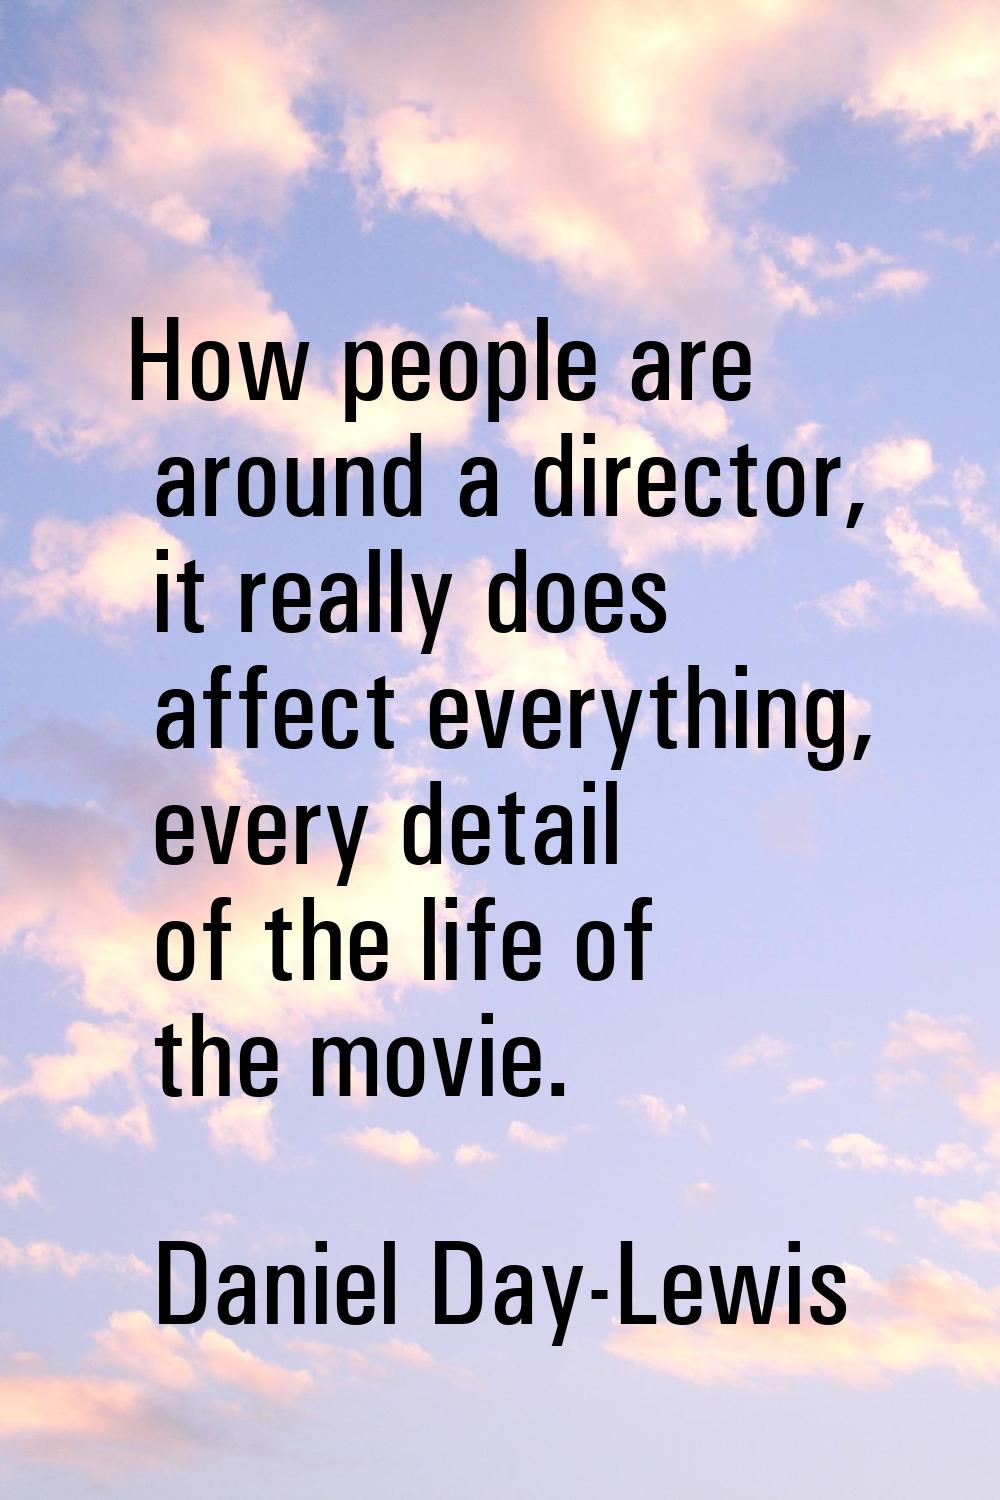 How people are around a director, it really does affect everything, every detail of the life of the